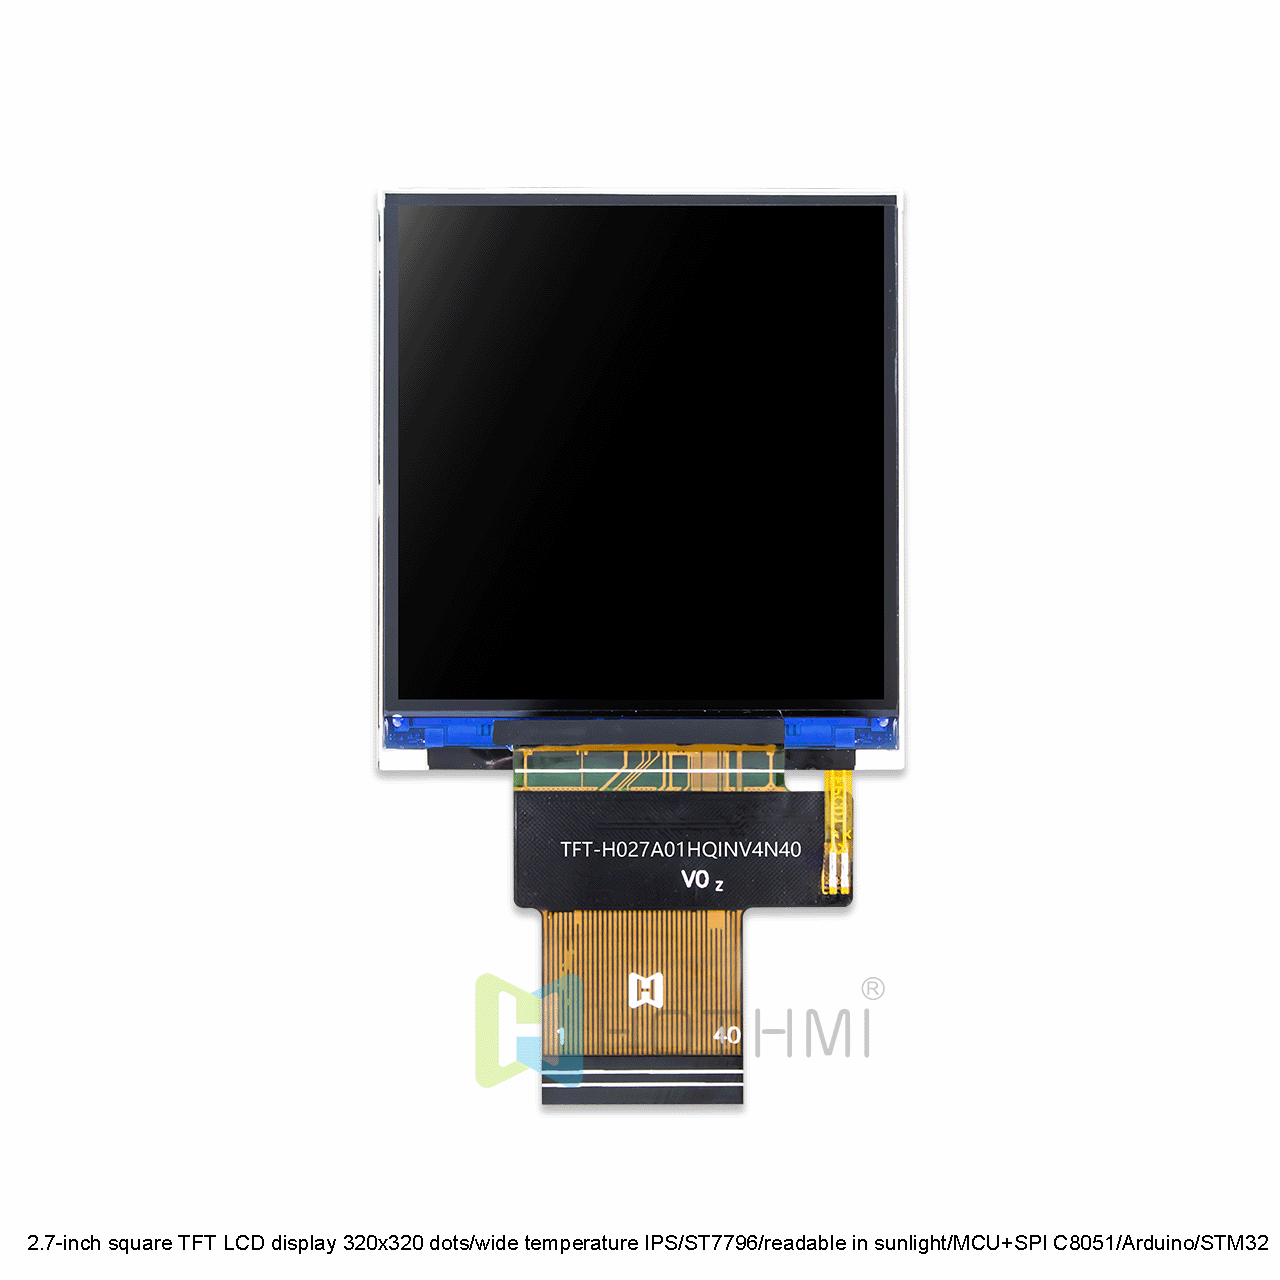 2.7-inch square TFT LCD display 320x320 dots/wide temperature IPS full angle/ST7796/readable in sunlight/MCU+SPI compatible with C8051/Arduino/STM32